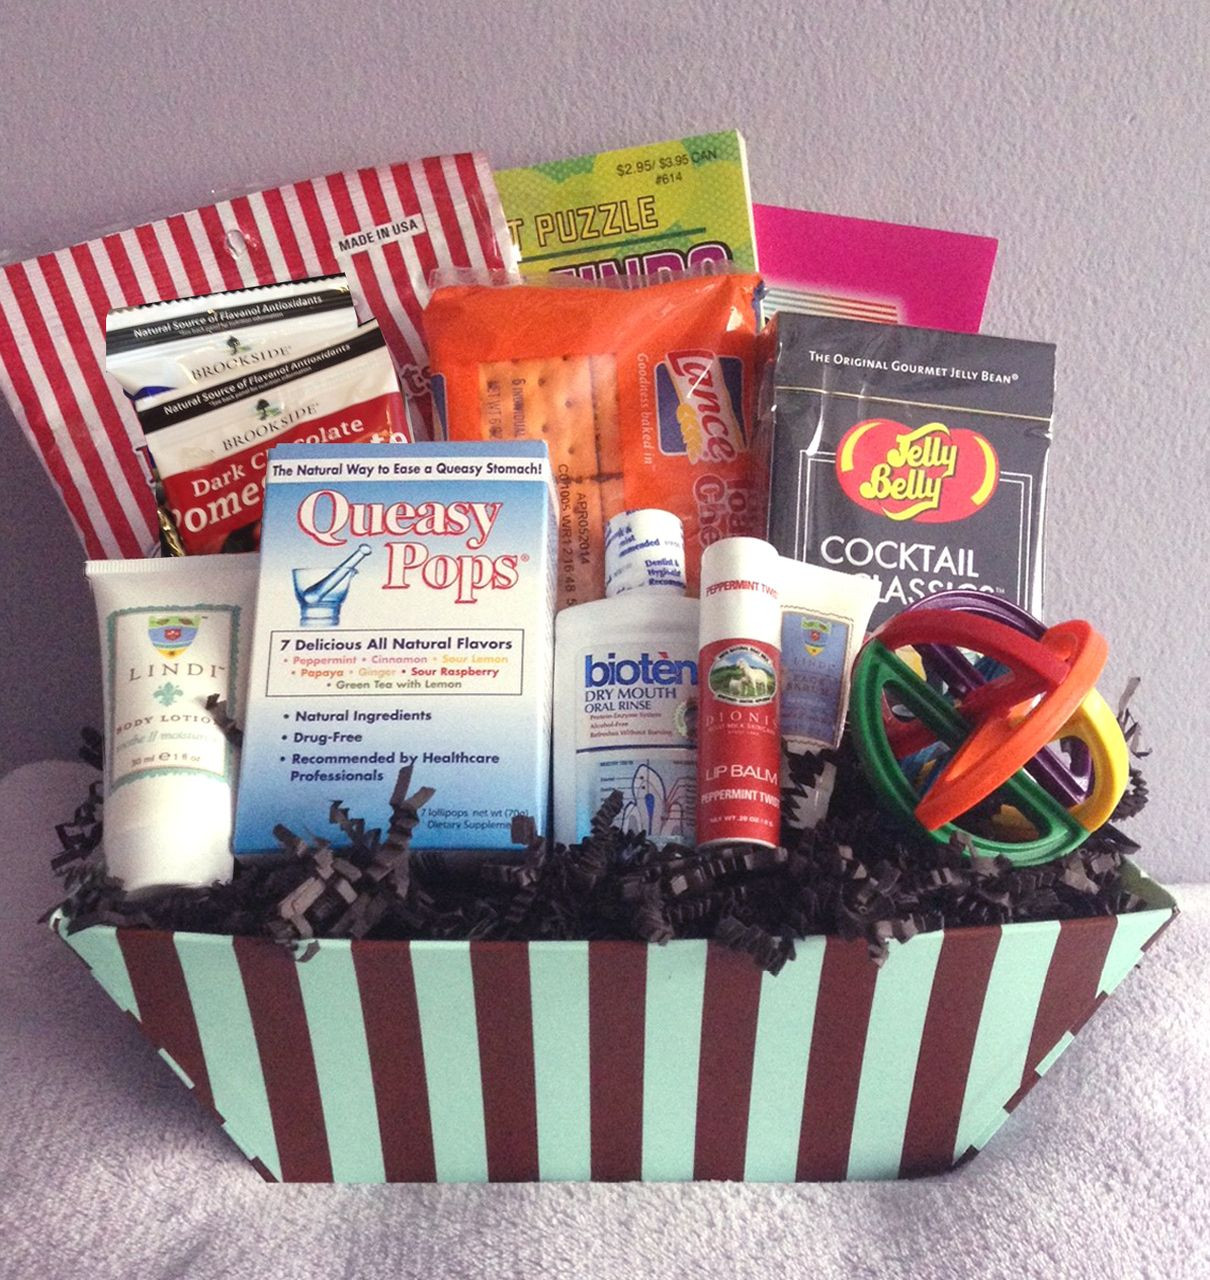 Chemotherapy Gift Ideas
 Men s Small Chemo Basket Gift Ideas